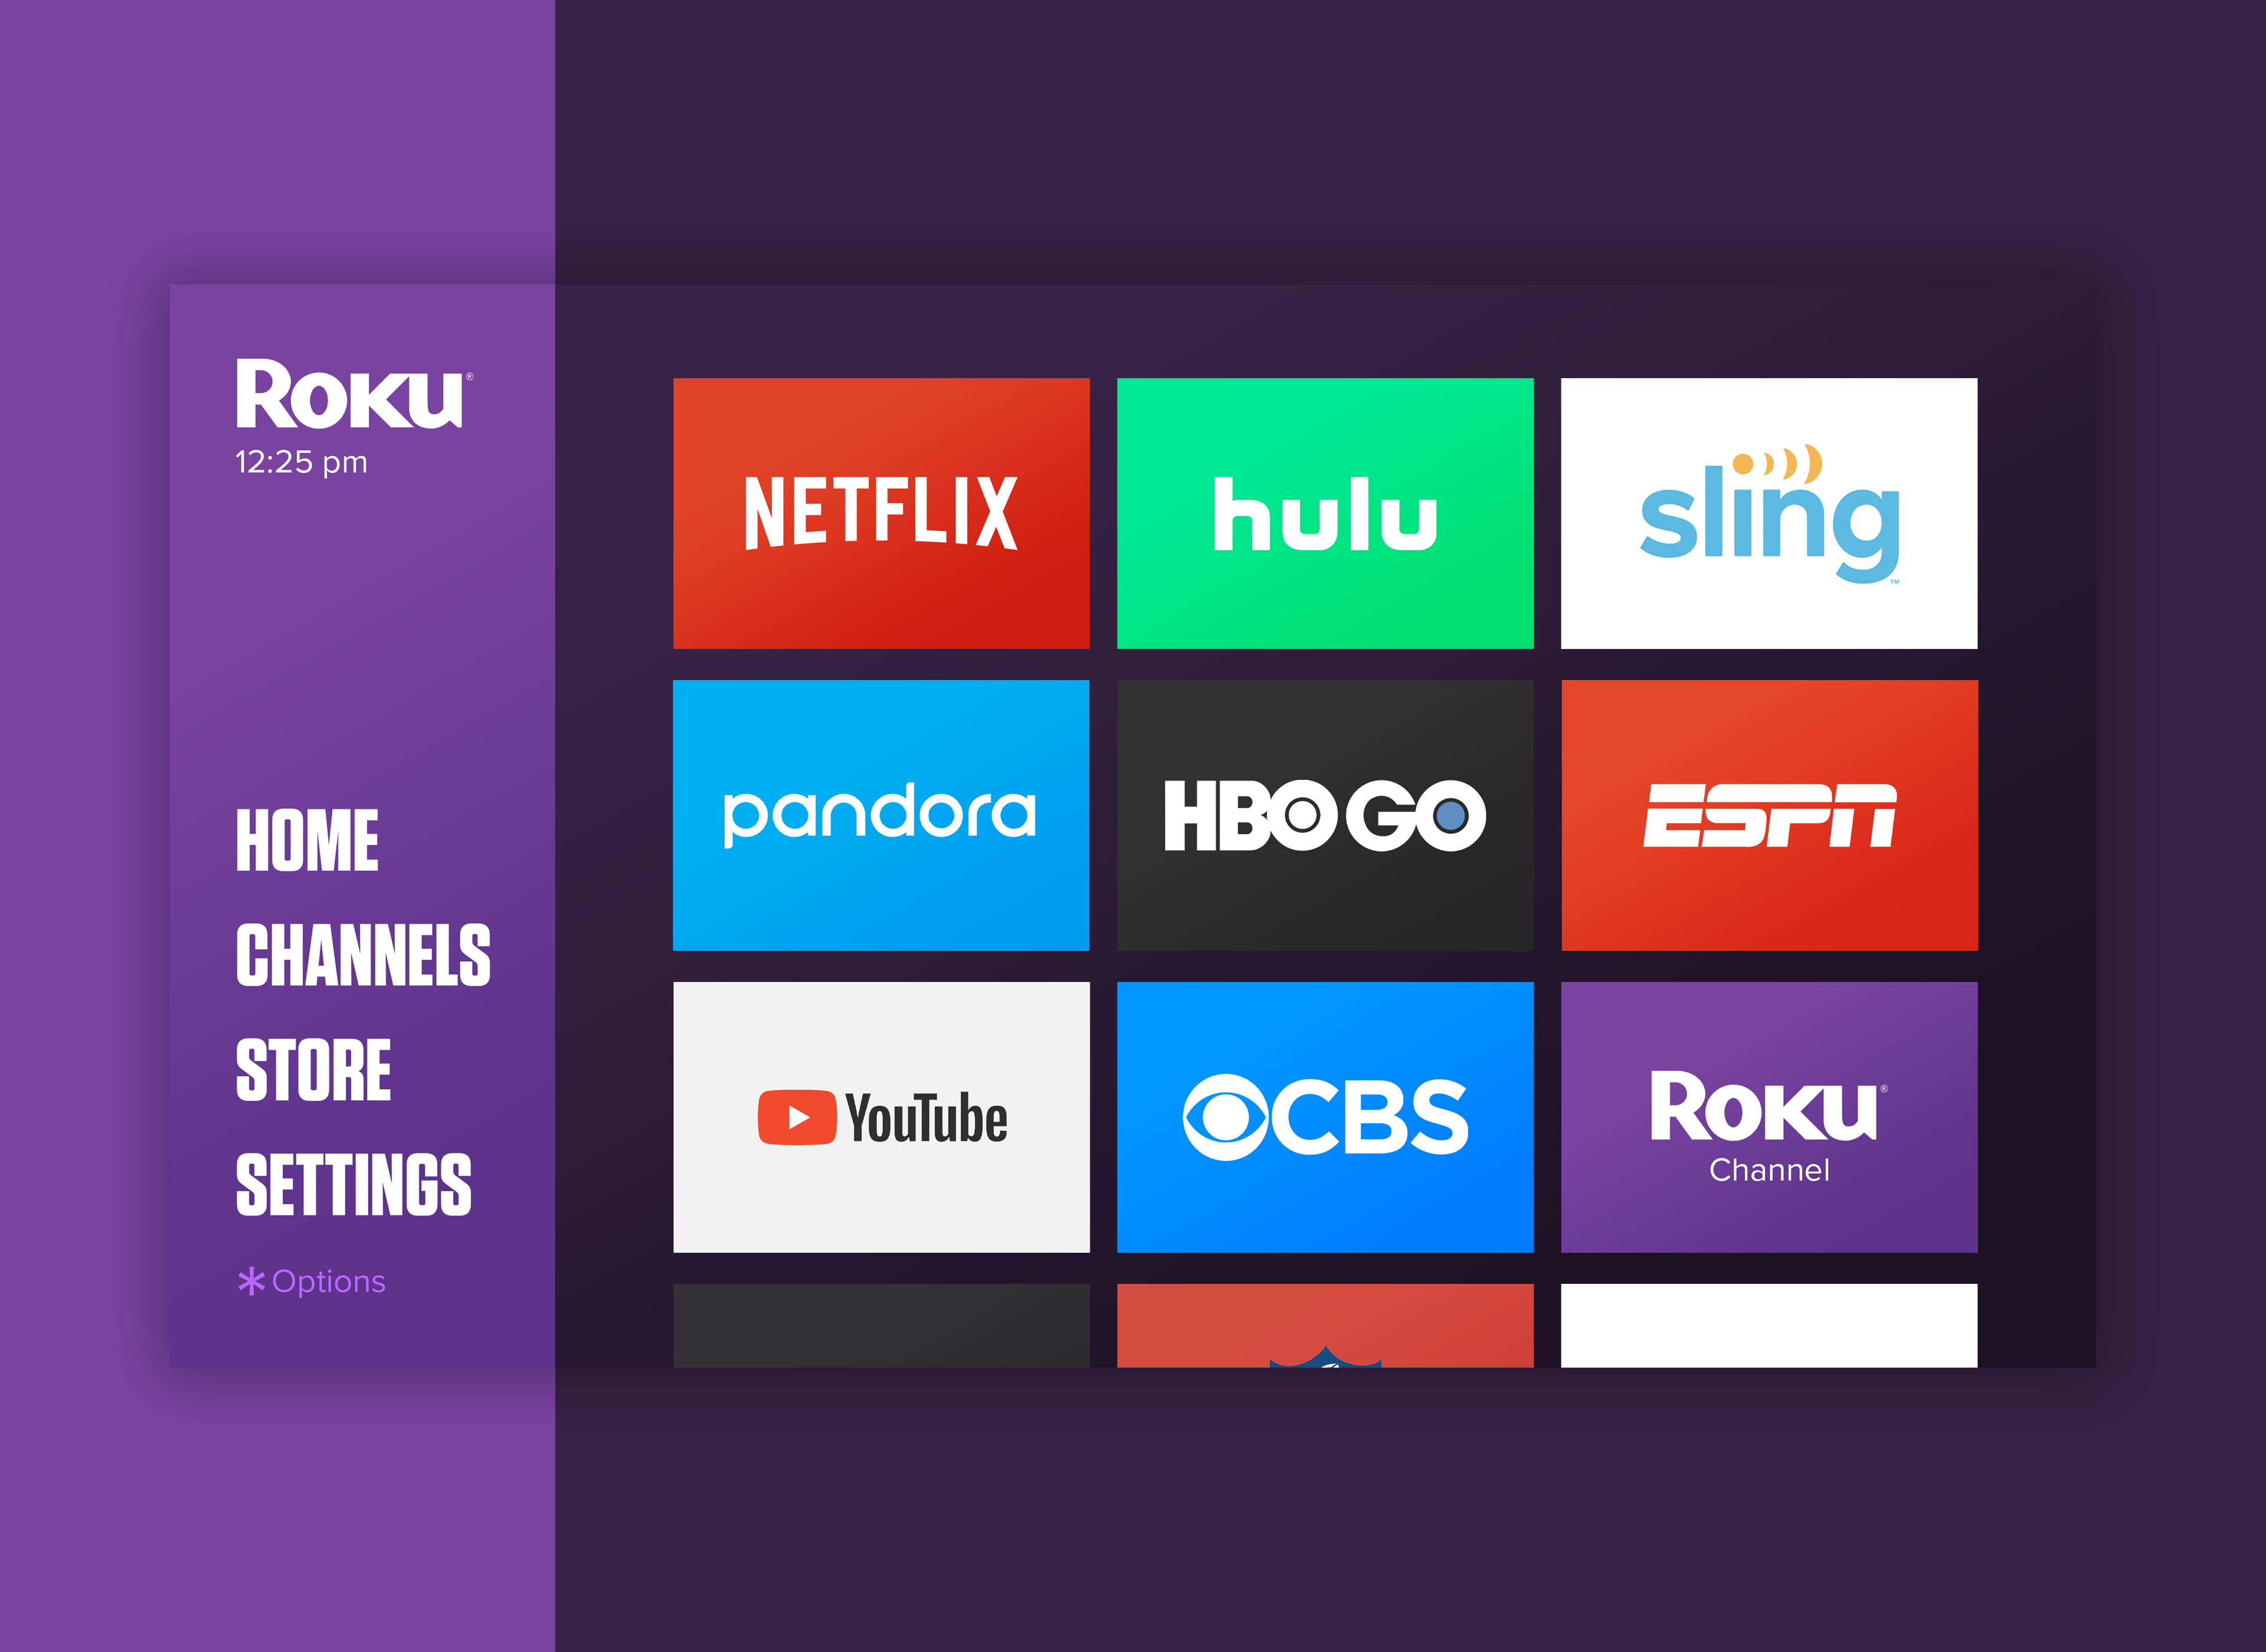 Connected TV Advertising on Roku and the Roku Channel